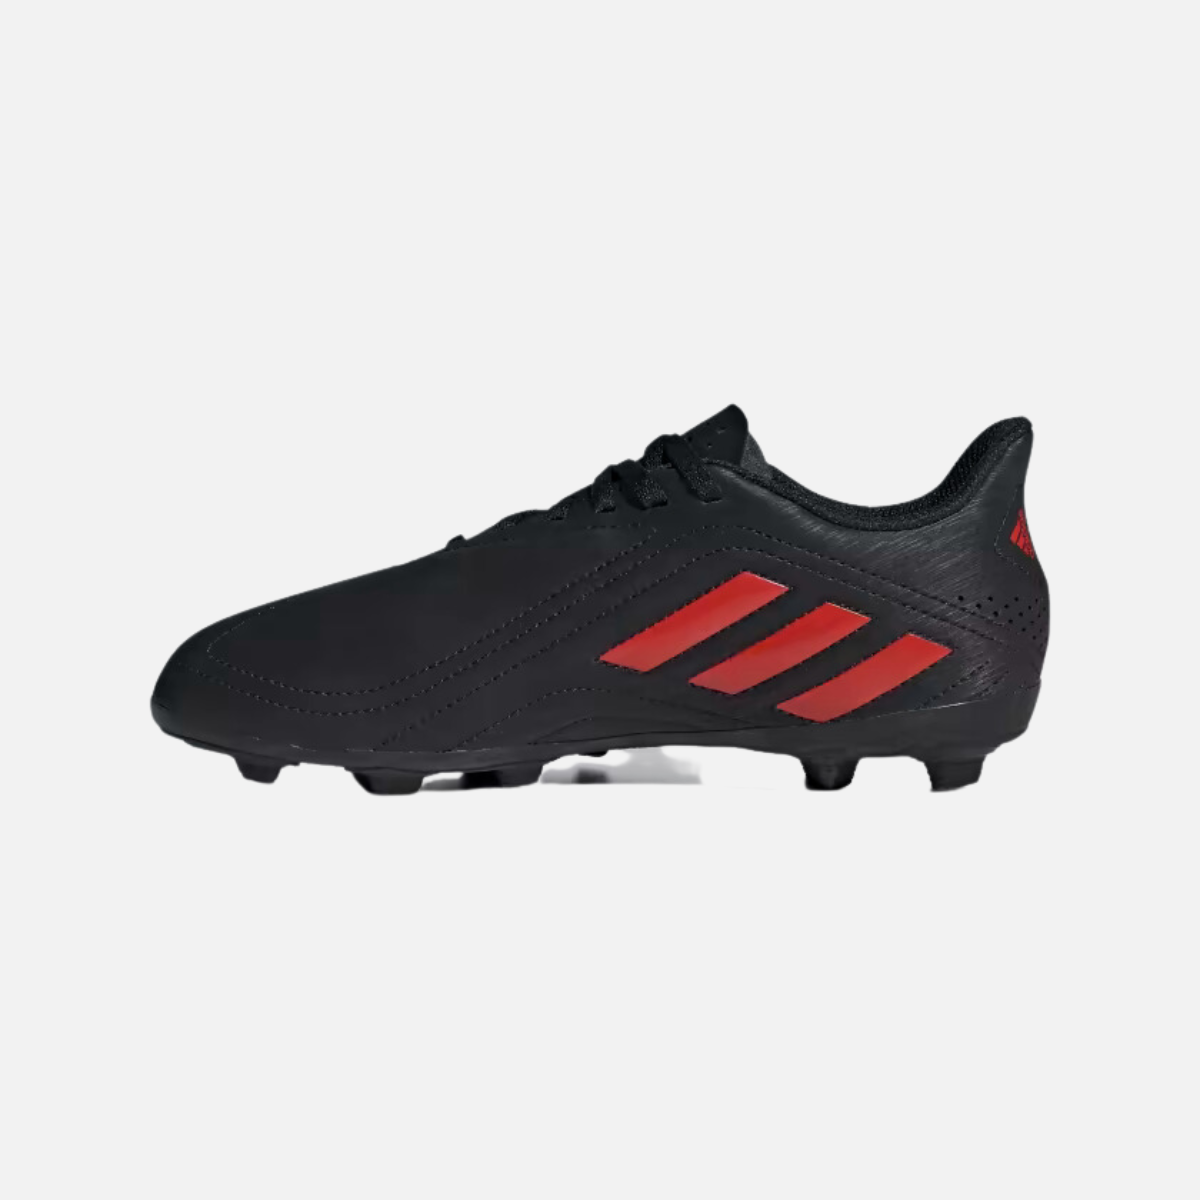 Adidas Deportivo Flexible Ground Kids Football Shoes -Core Black/Active Red/Cloud White